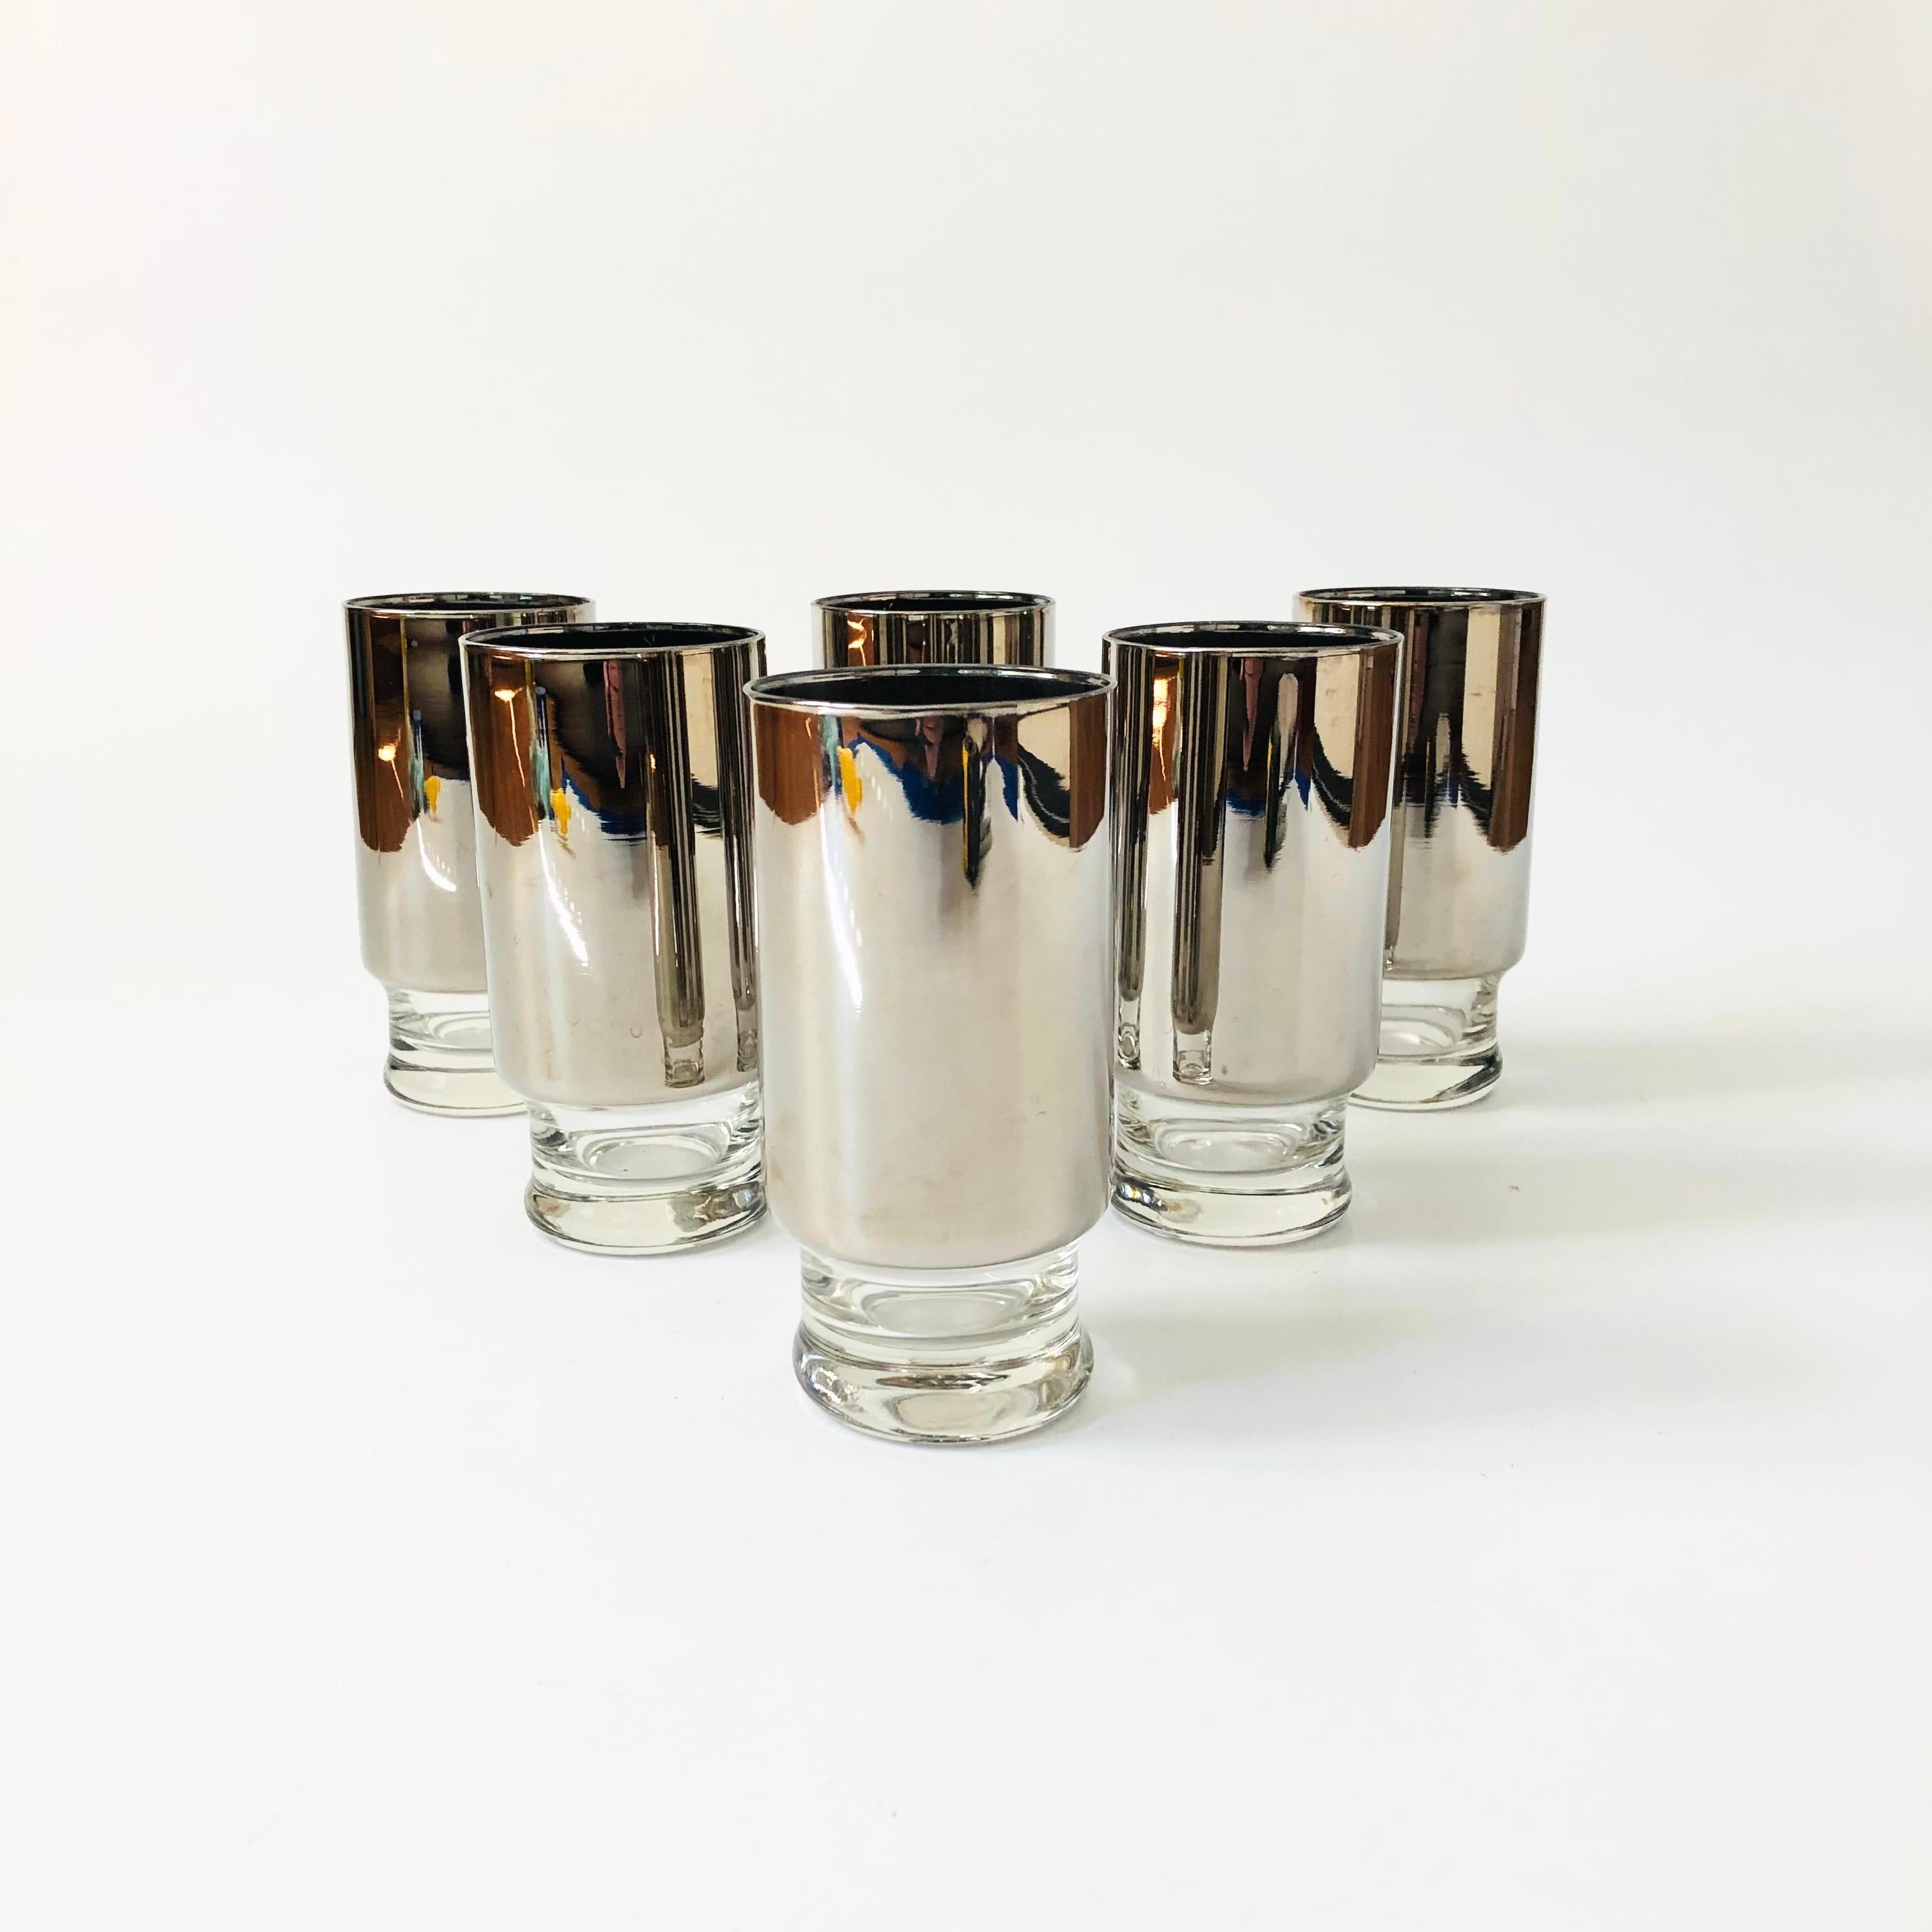 A beautiful set of 6 mid century silver fade tumblers. Each glass has a deep metallic silver finish with a clear base. Perfect for using as water glasses or for cocktails.

